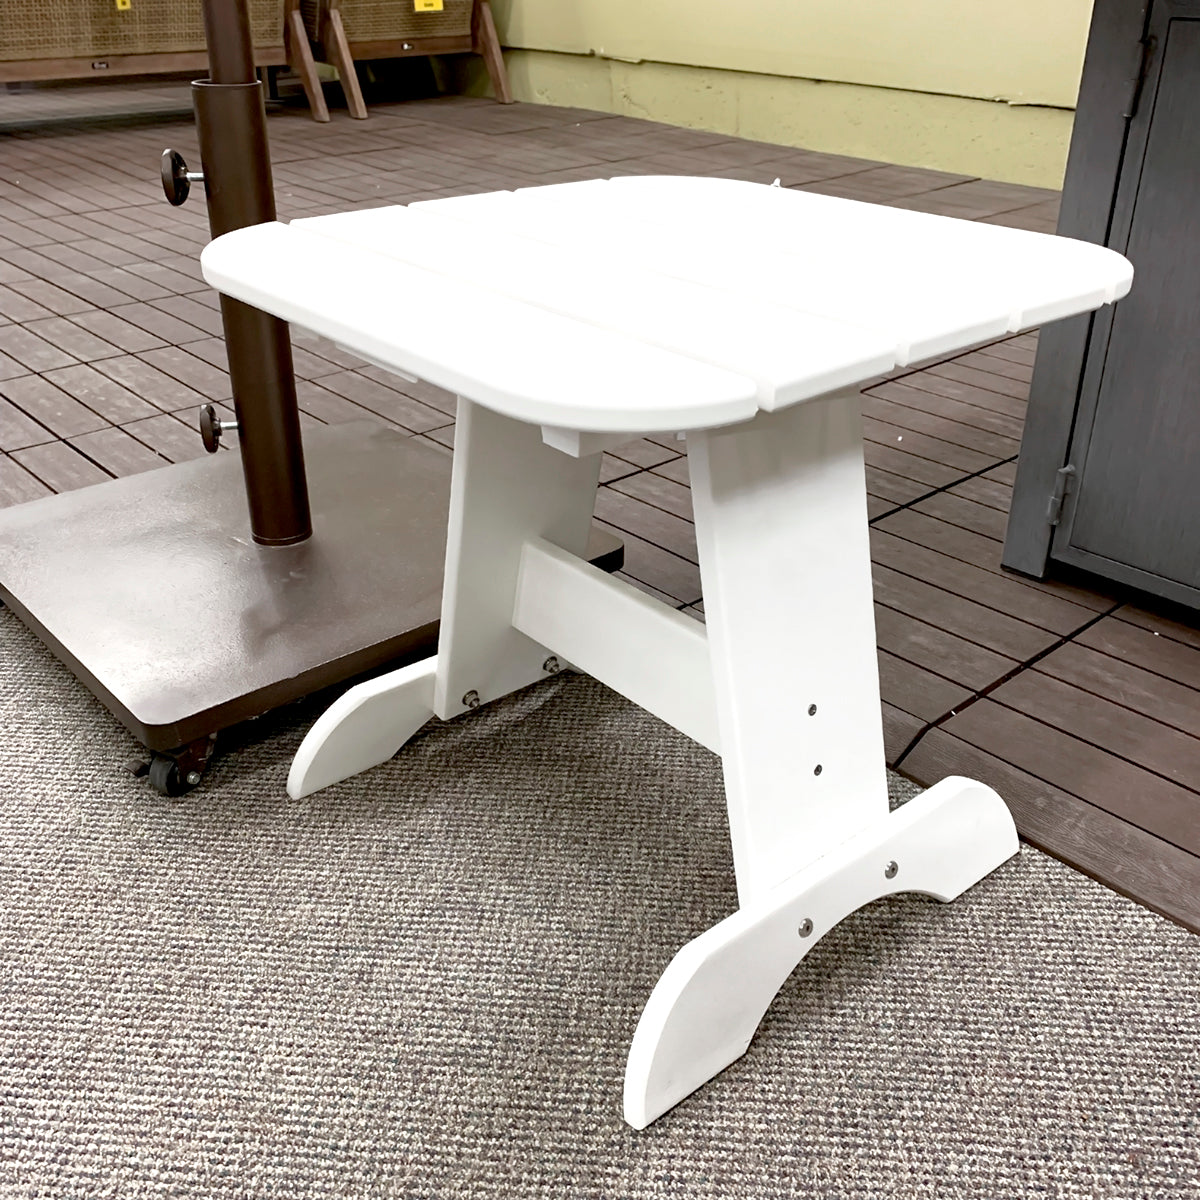 Seaside Casual Adirondack End Table is available in our Jacobs Custom Living Spokane Valley Showroom.